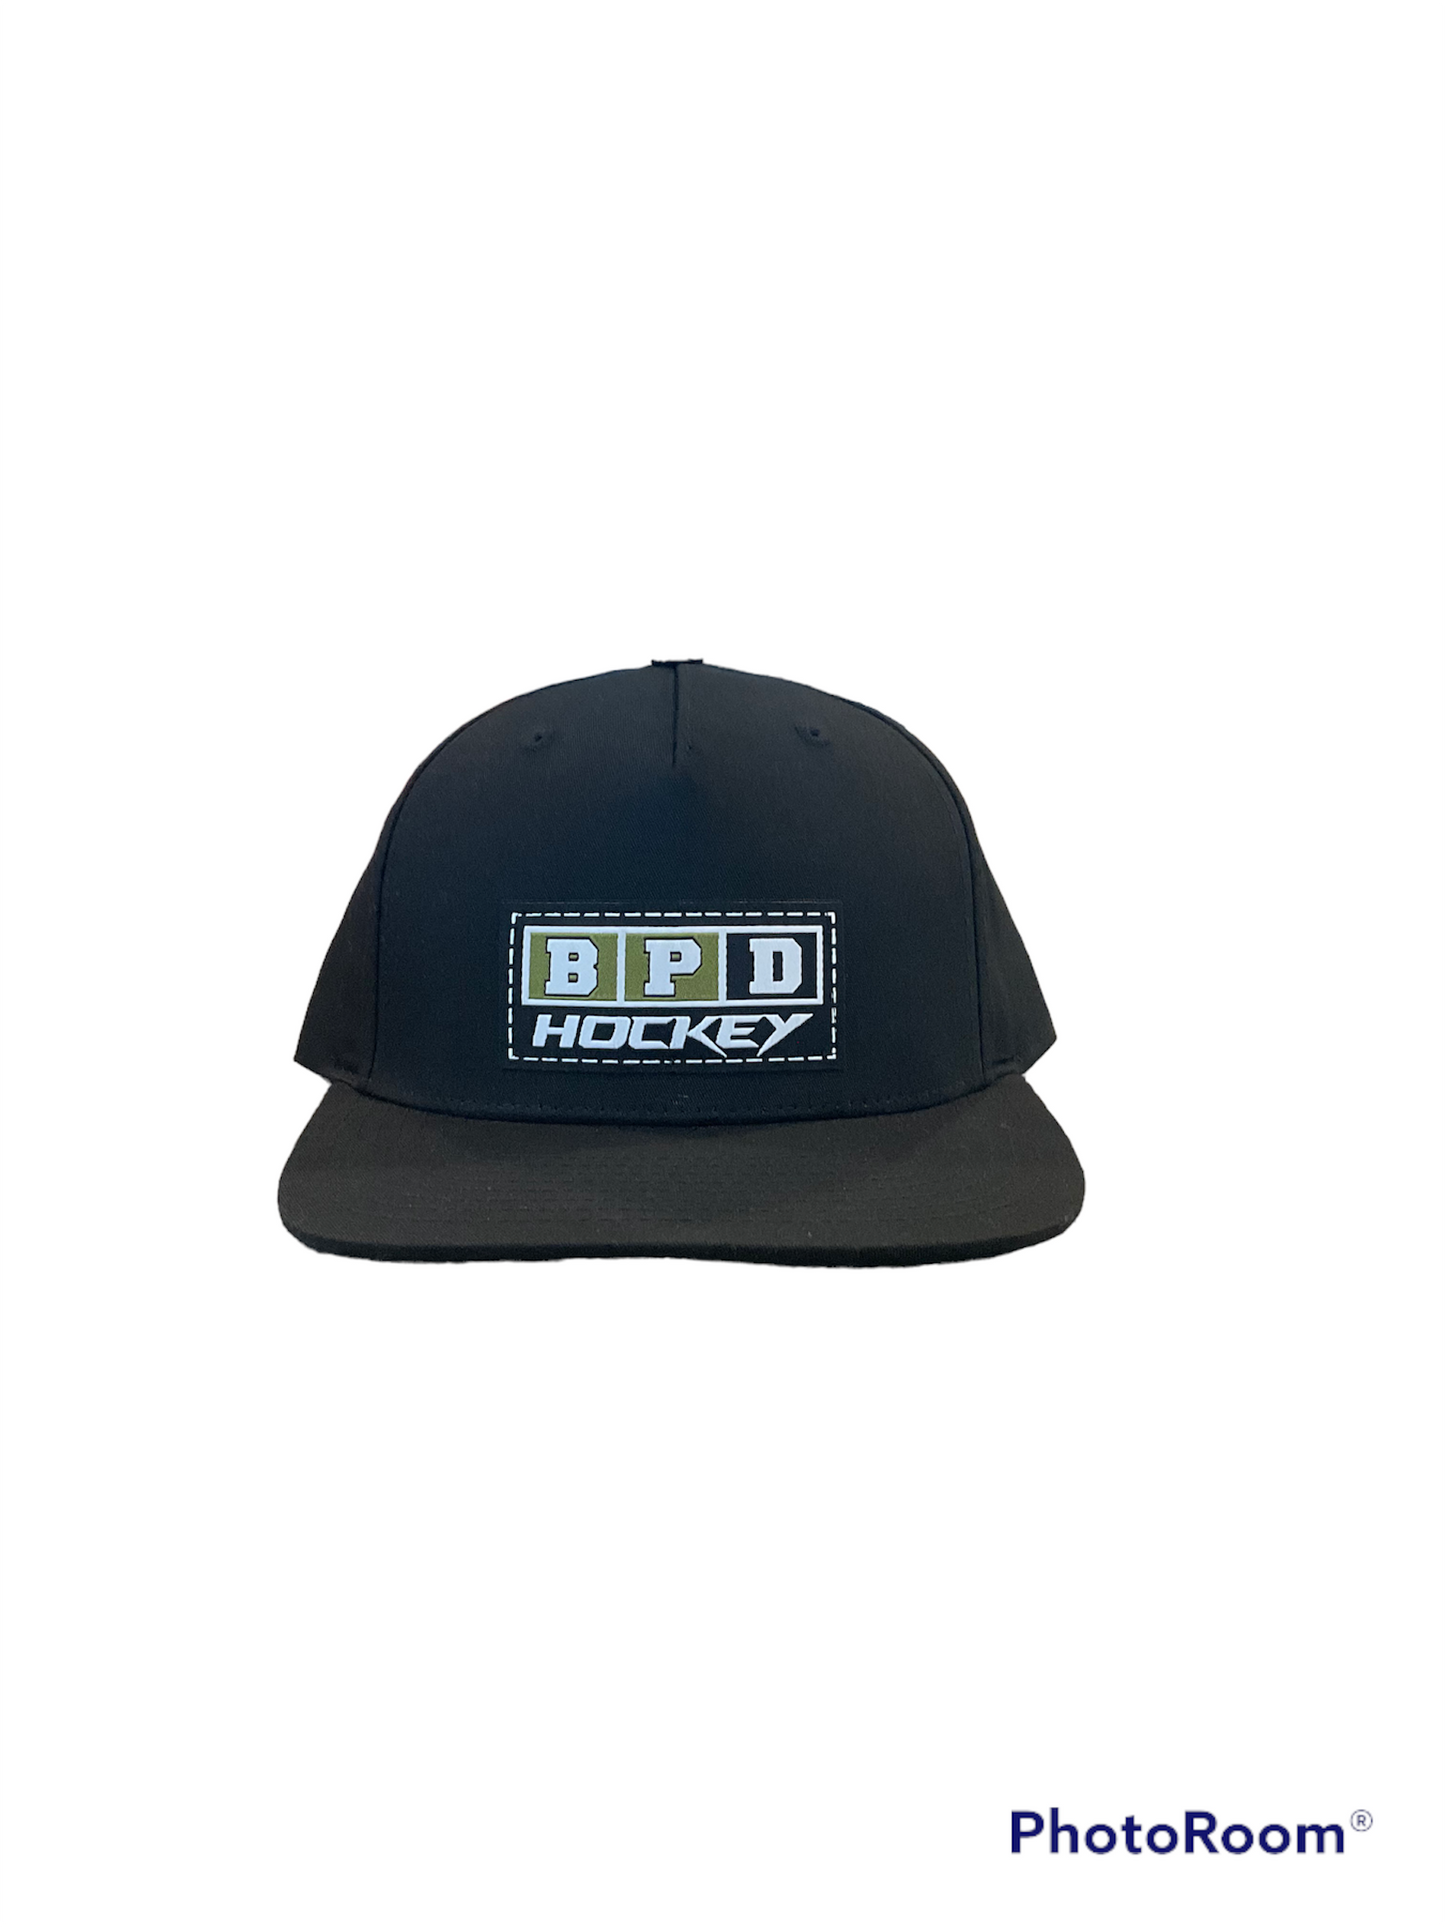 All Black and Olive Green BPD Hockey Hat